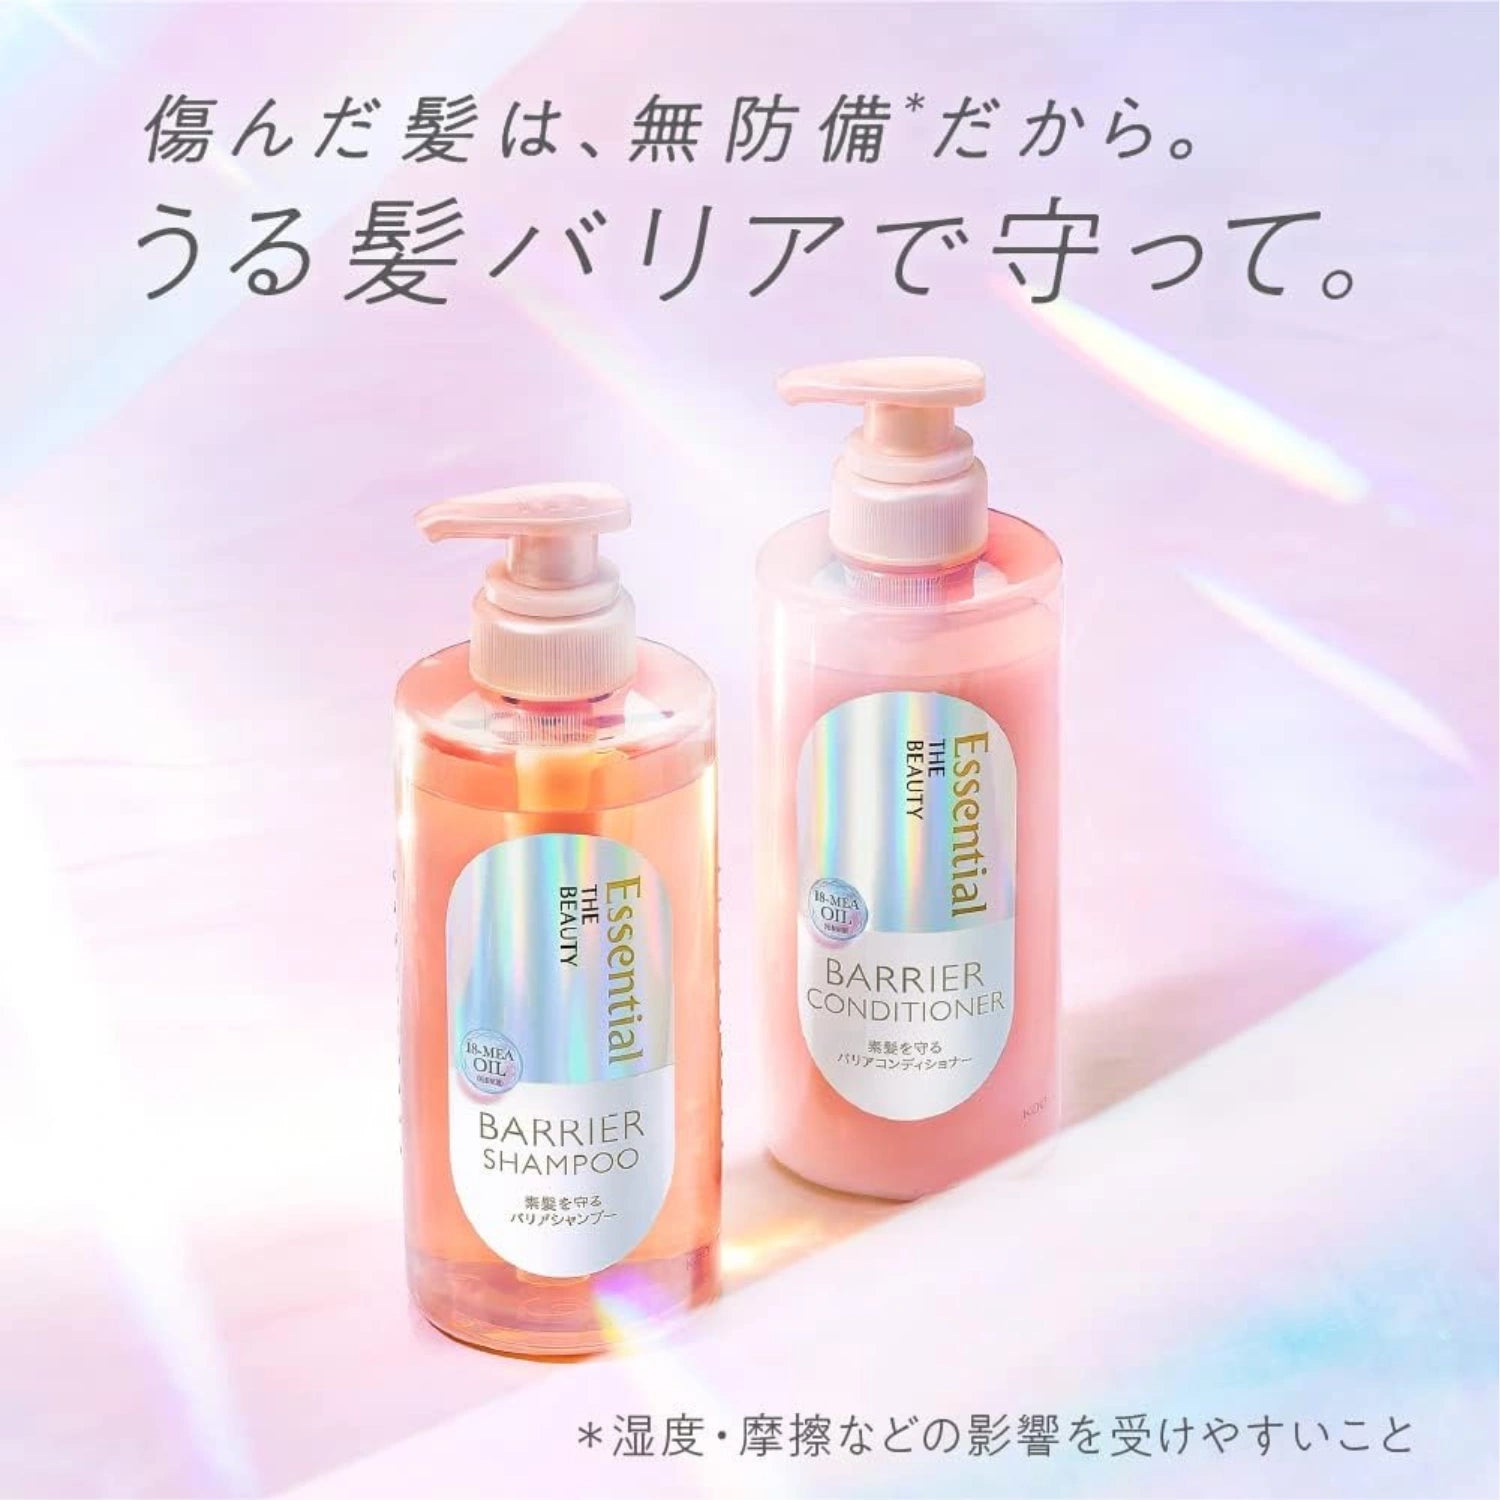 Kao Essential The Beauty Barrier Shampoo & Conditioner Set (450ml Each) - Buy Me Japan